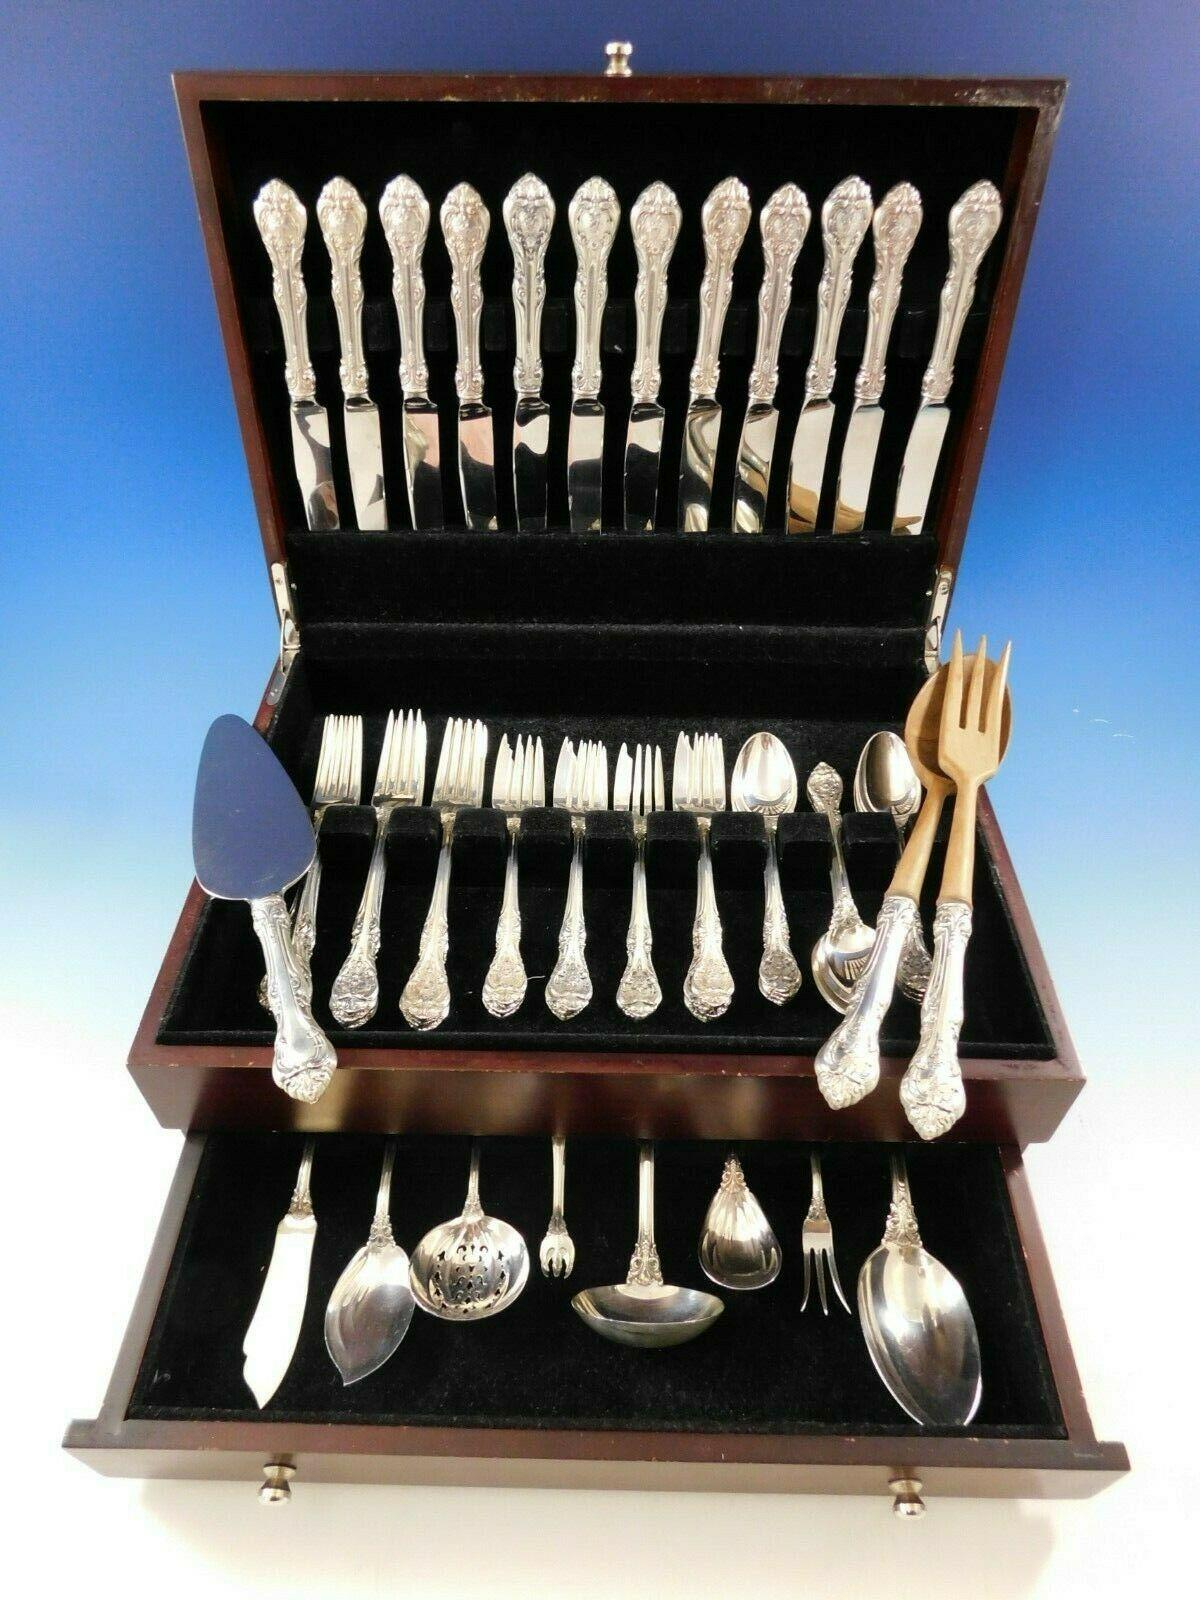 Monumental King Edward by Gorham sterling silver flatware set - 58 pieces. This set includes:

12 knives, 8 7/8